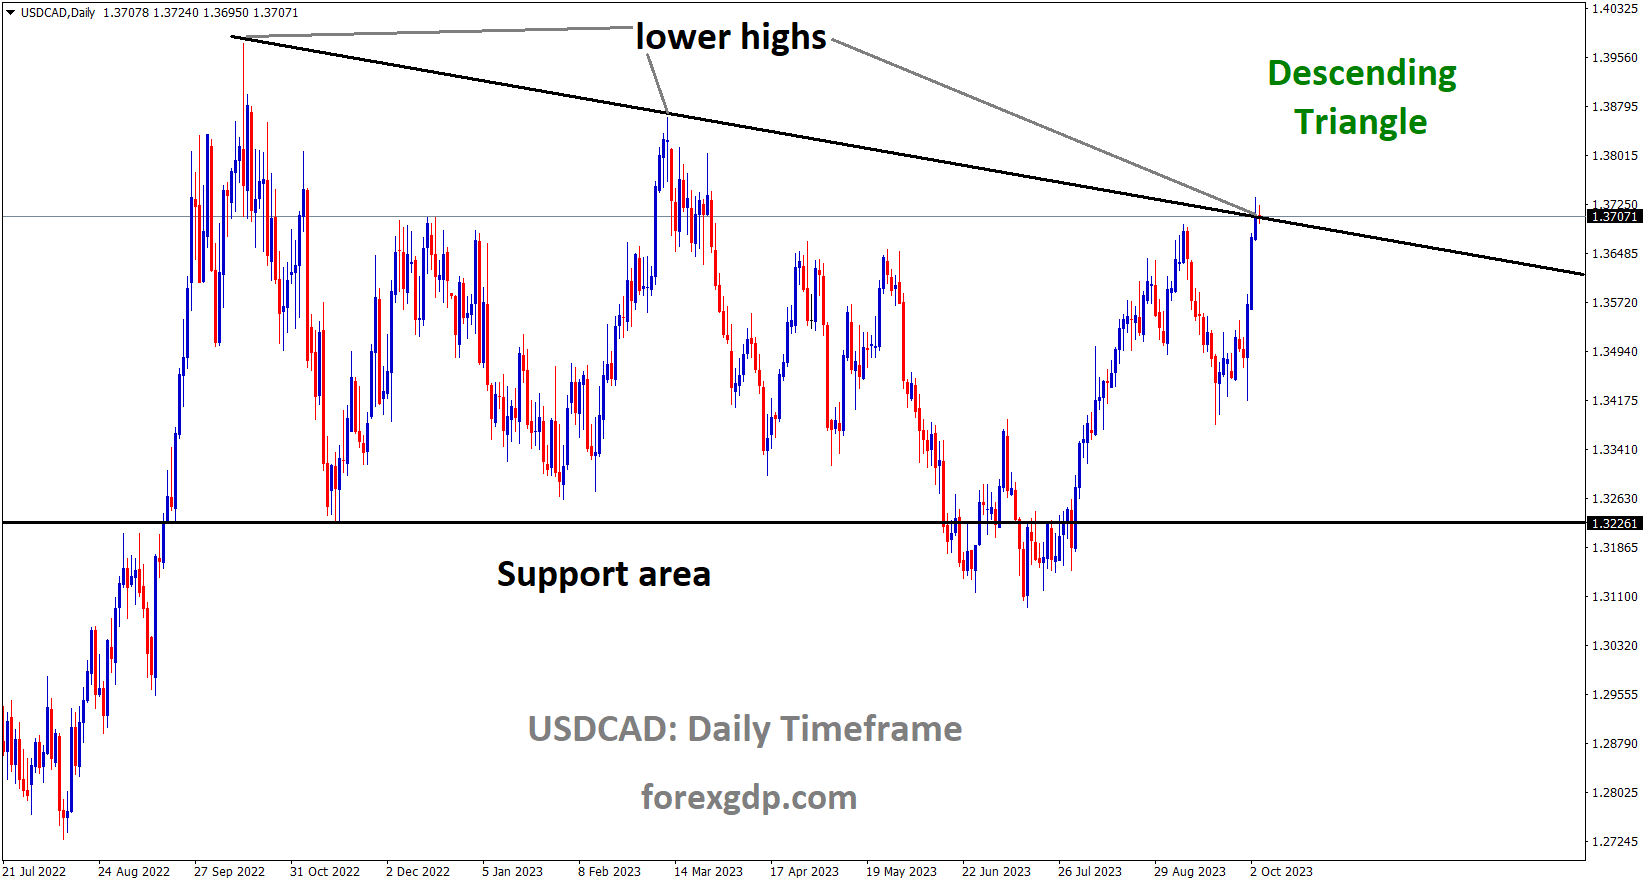 USDCAD is moving in the Descending triangle pattern and the market has reached the lower high area of the pattern